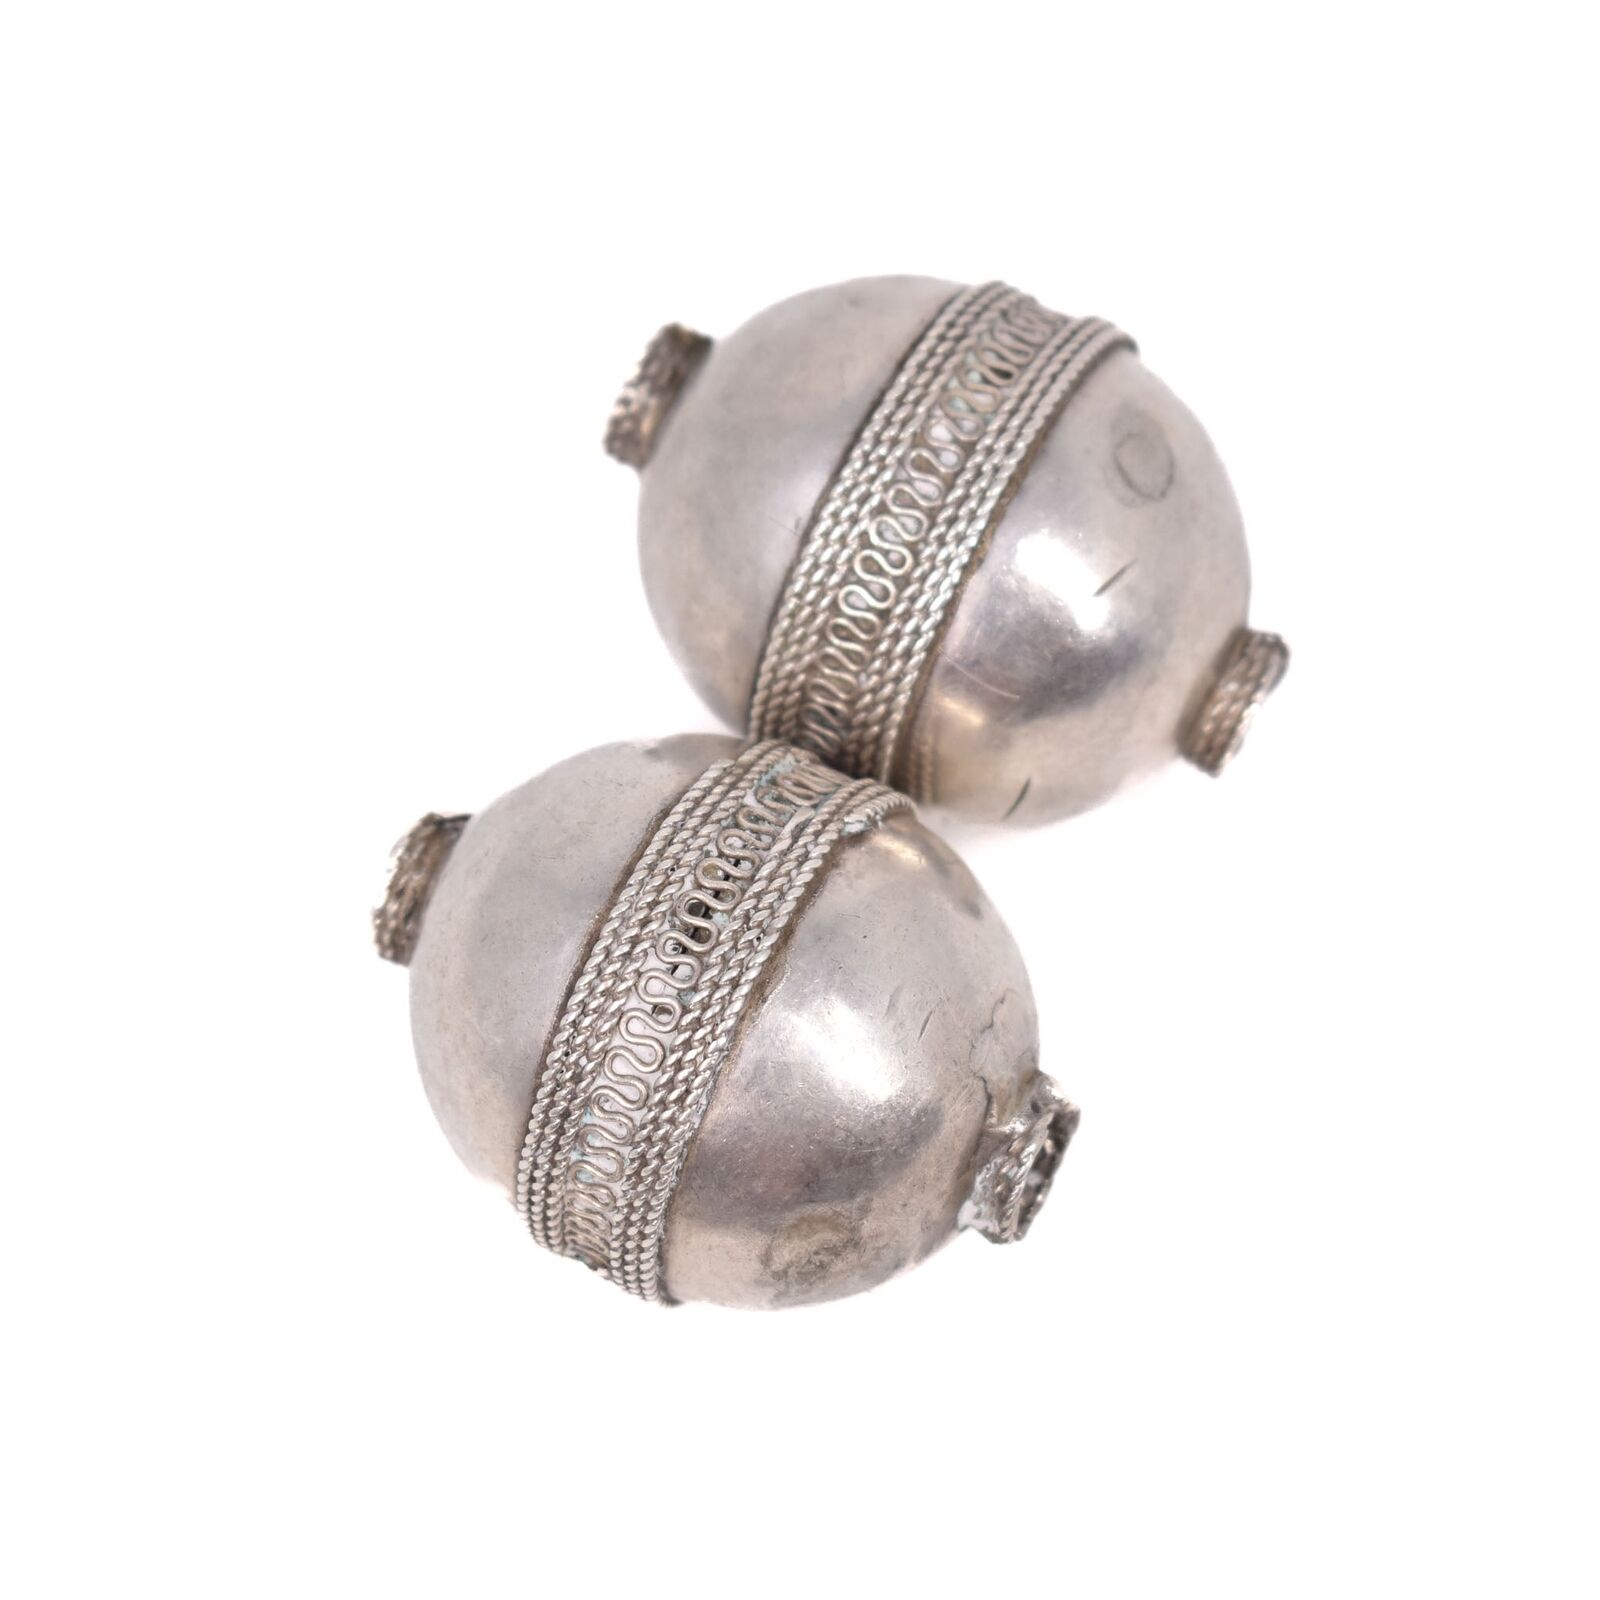 2 Loose Turkomen Silver Metal Beads Ruth Flynn Collection